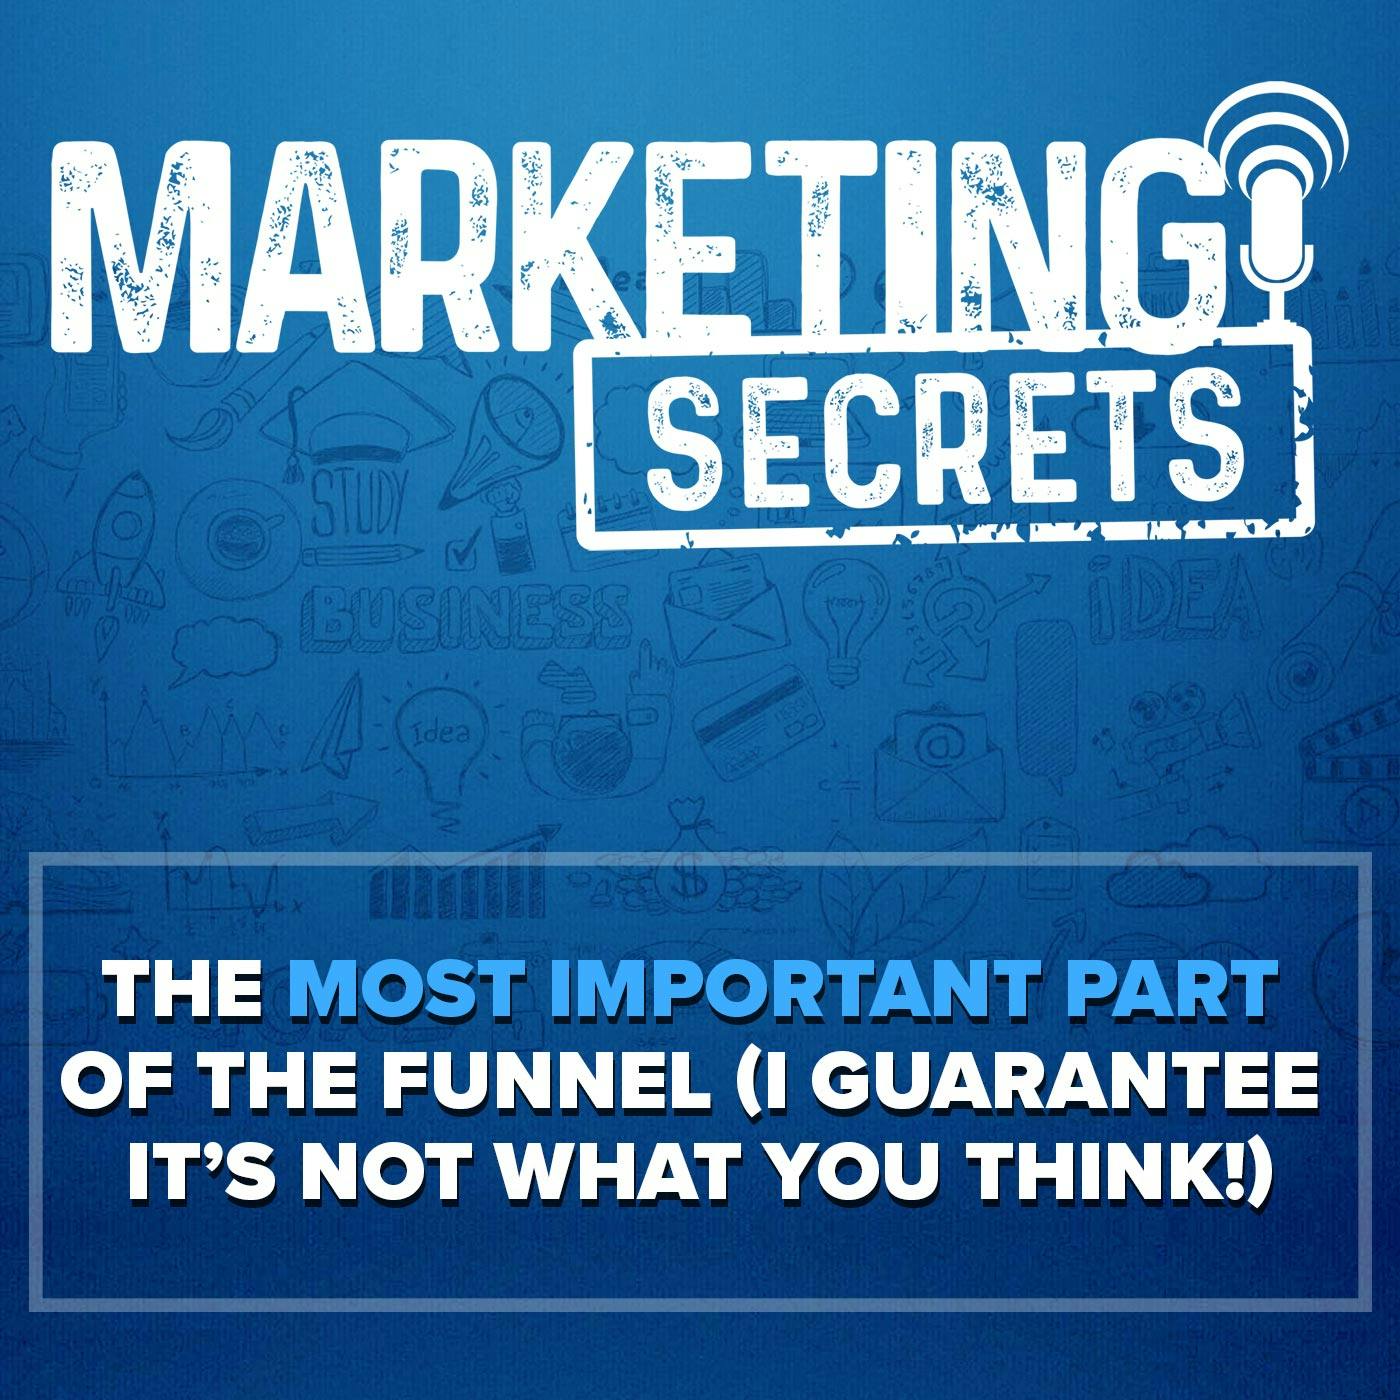 The MOST Important Part of the Funnel (I Guarantee it’s NOT What You Think!)